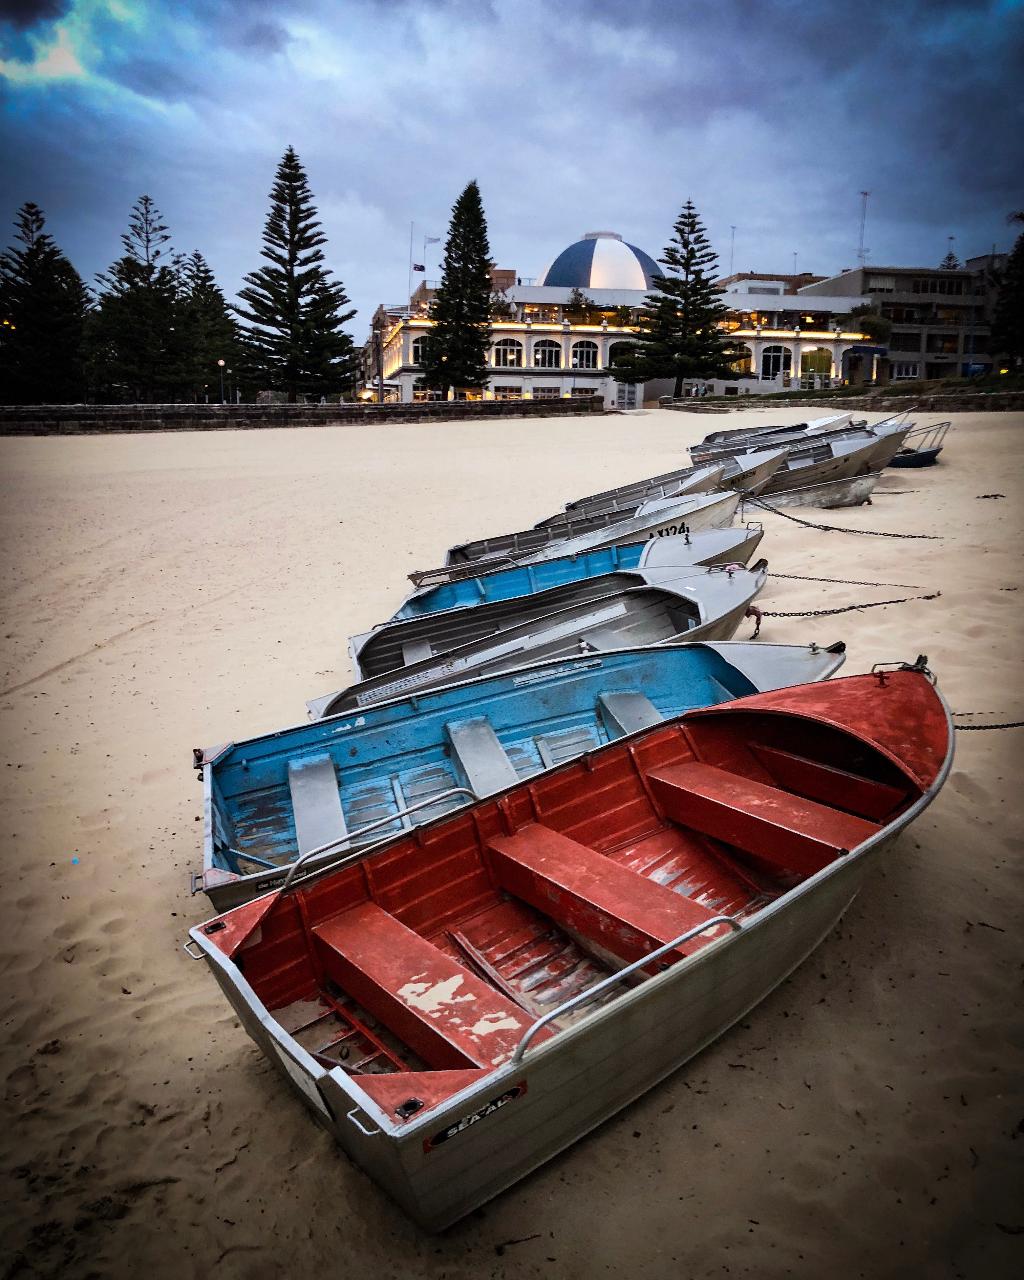 Phone photography – Sydney Coogee beach – Playing with Time